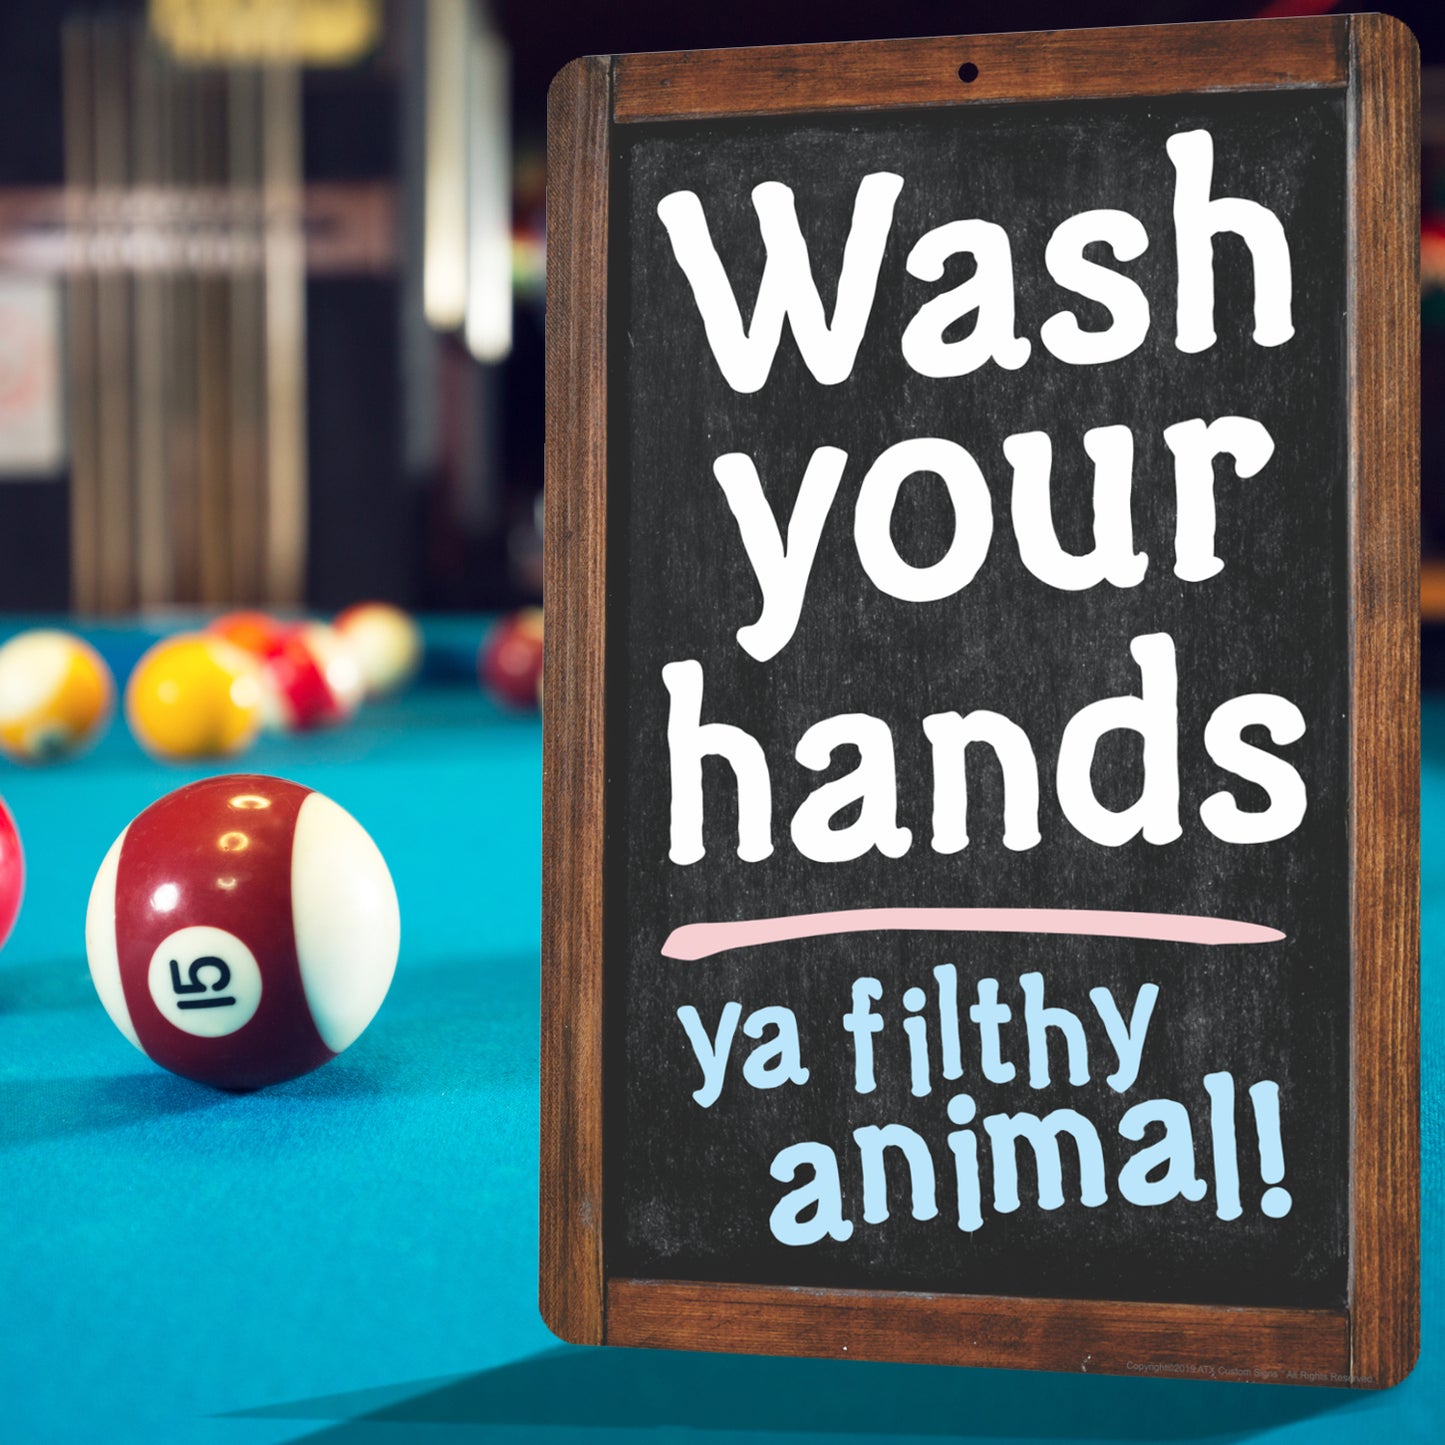 Funny Bathroom Decor Sign Wash your hands ya filthy animal! Sign - Size 8 x 12